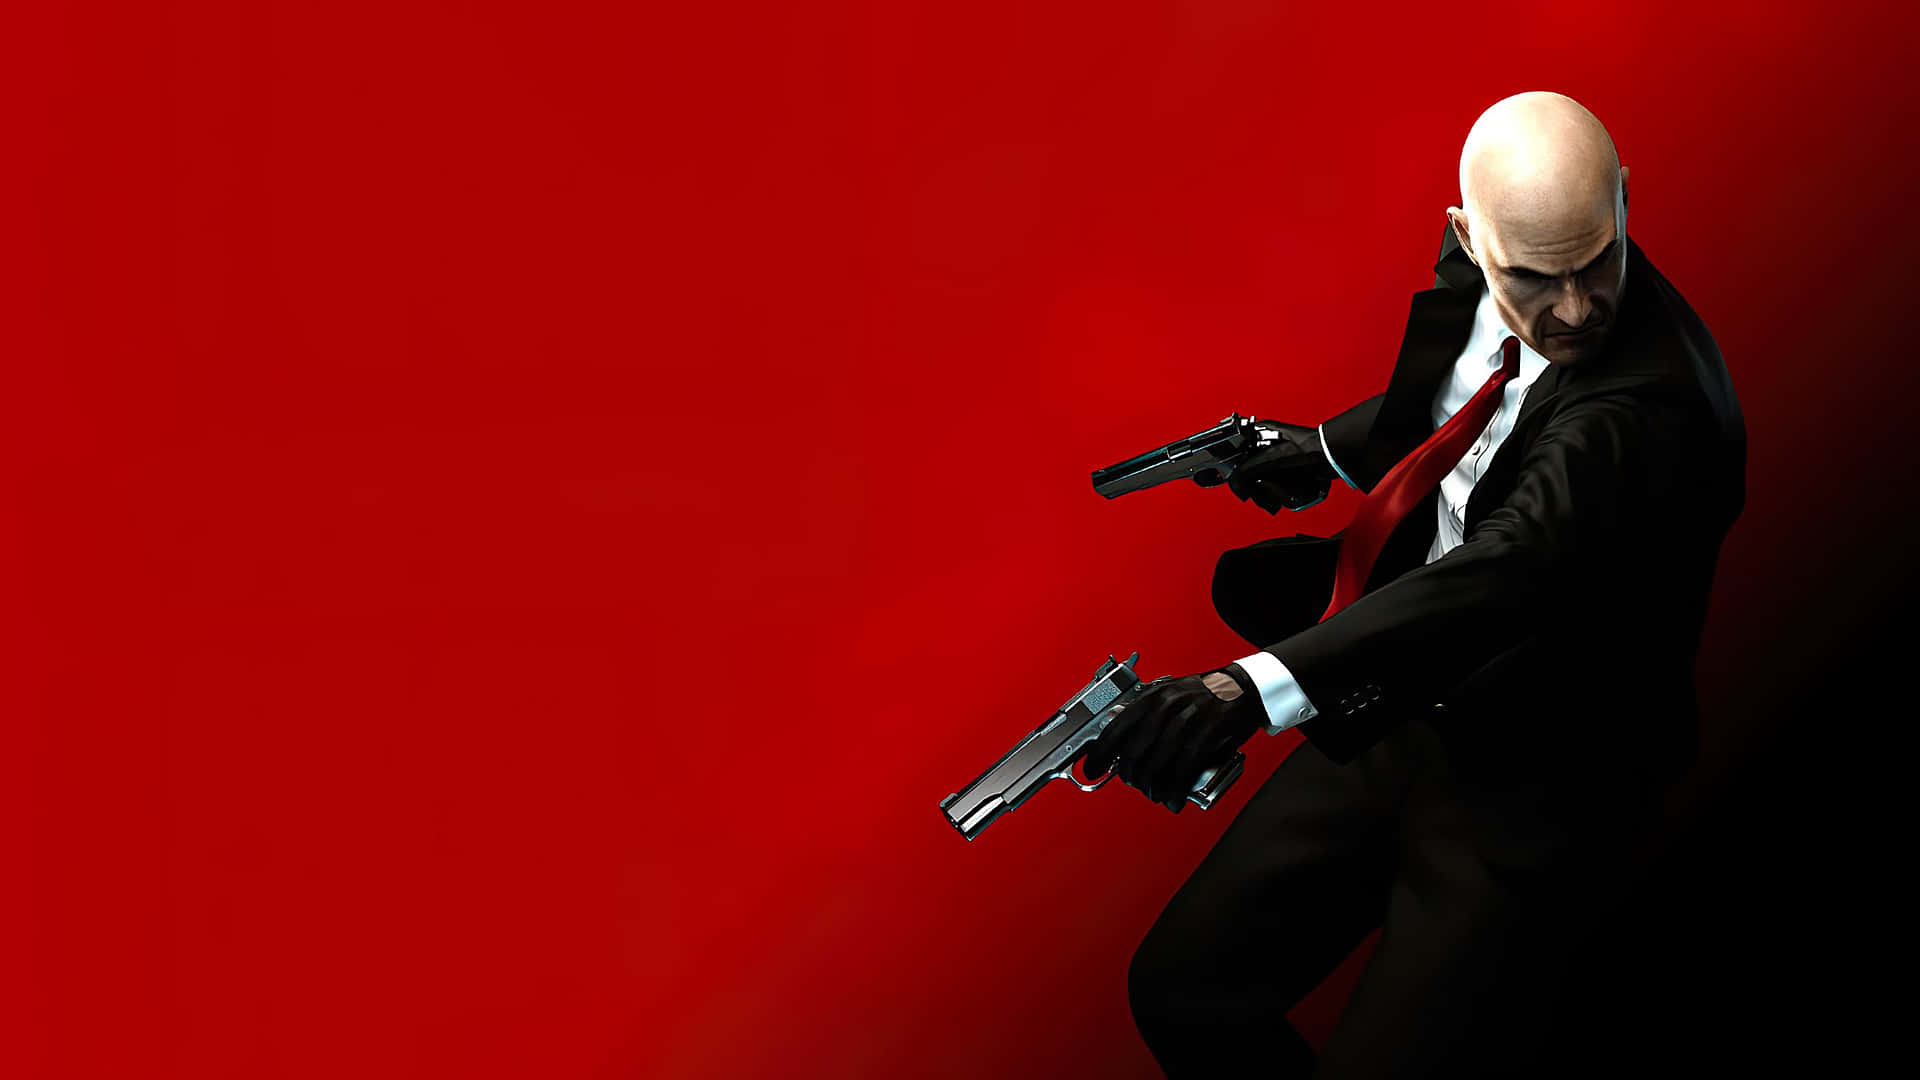 Agent 47 on the Hunt